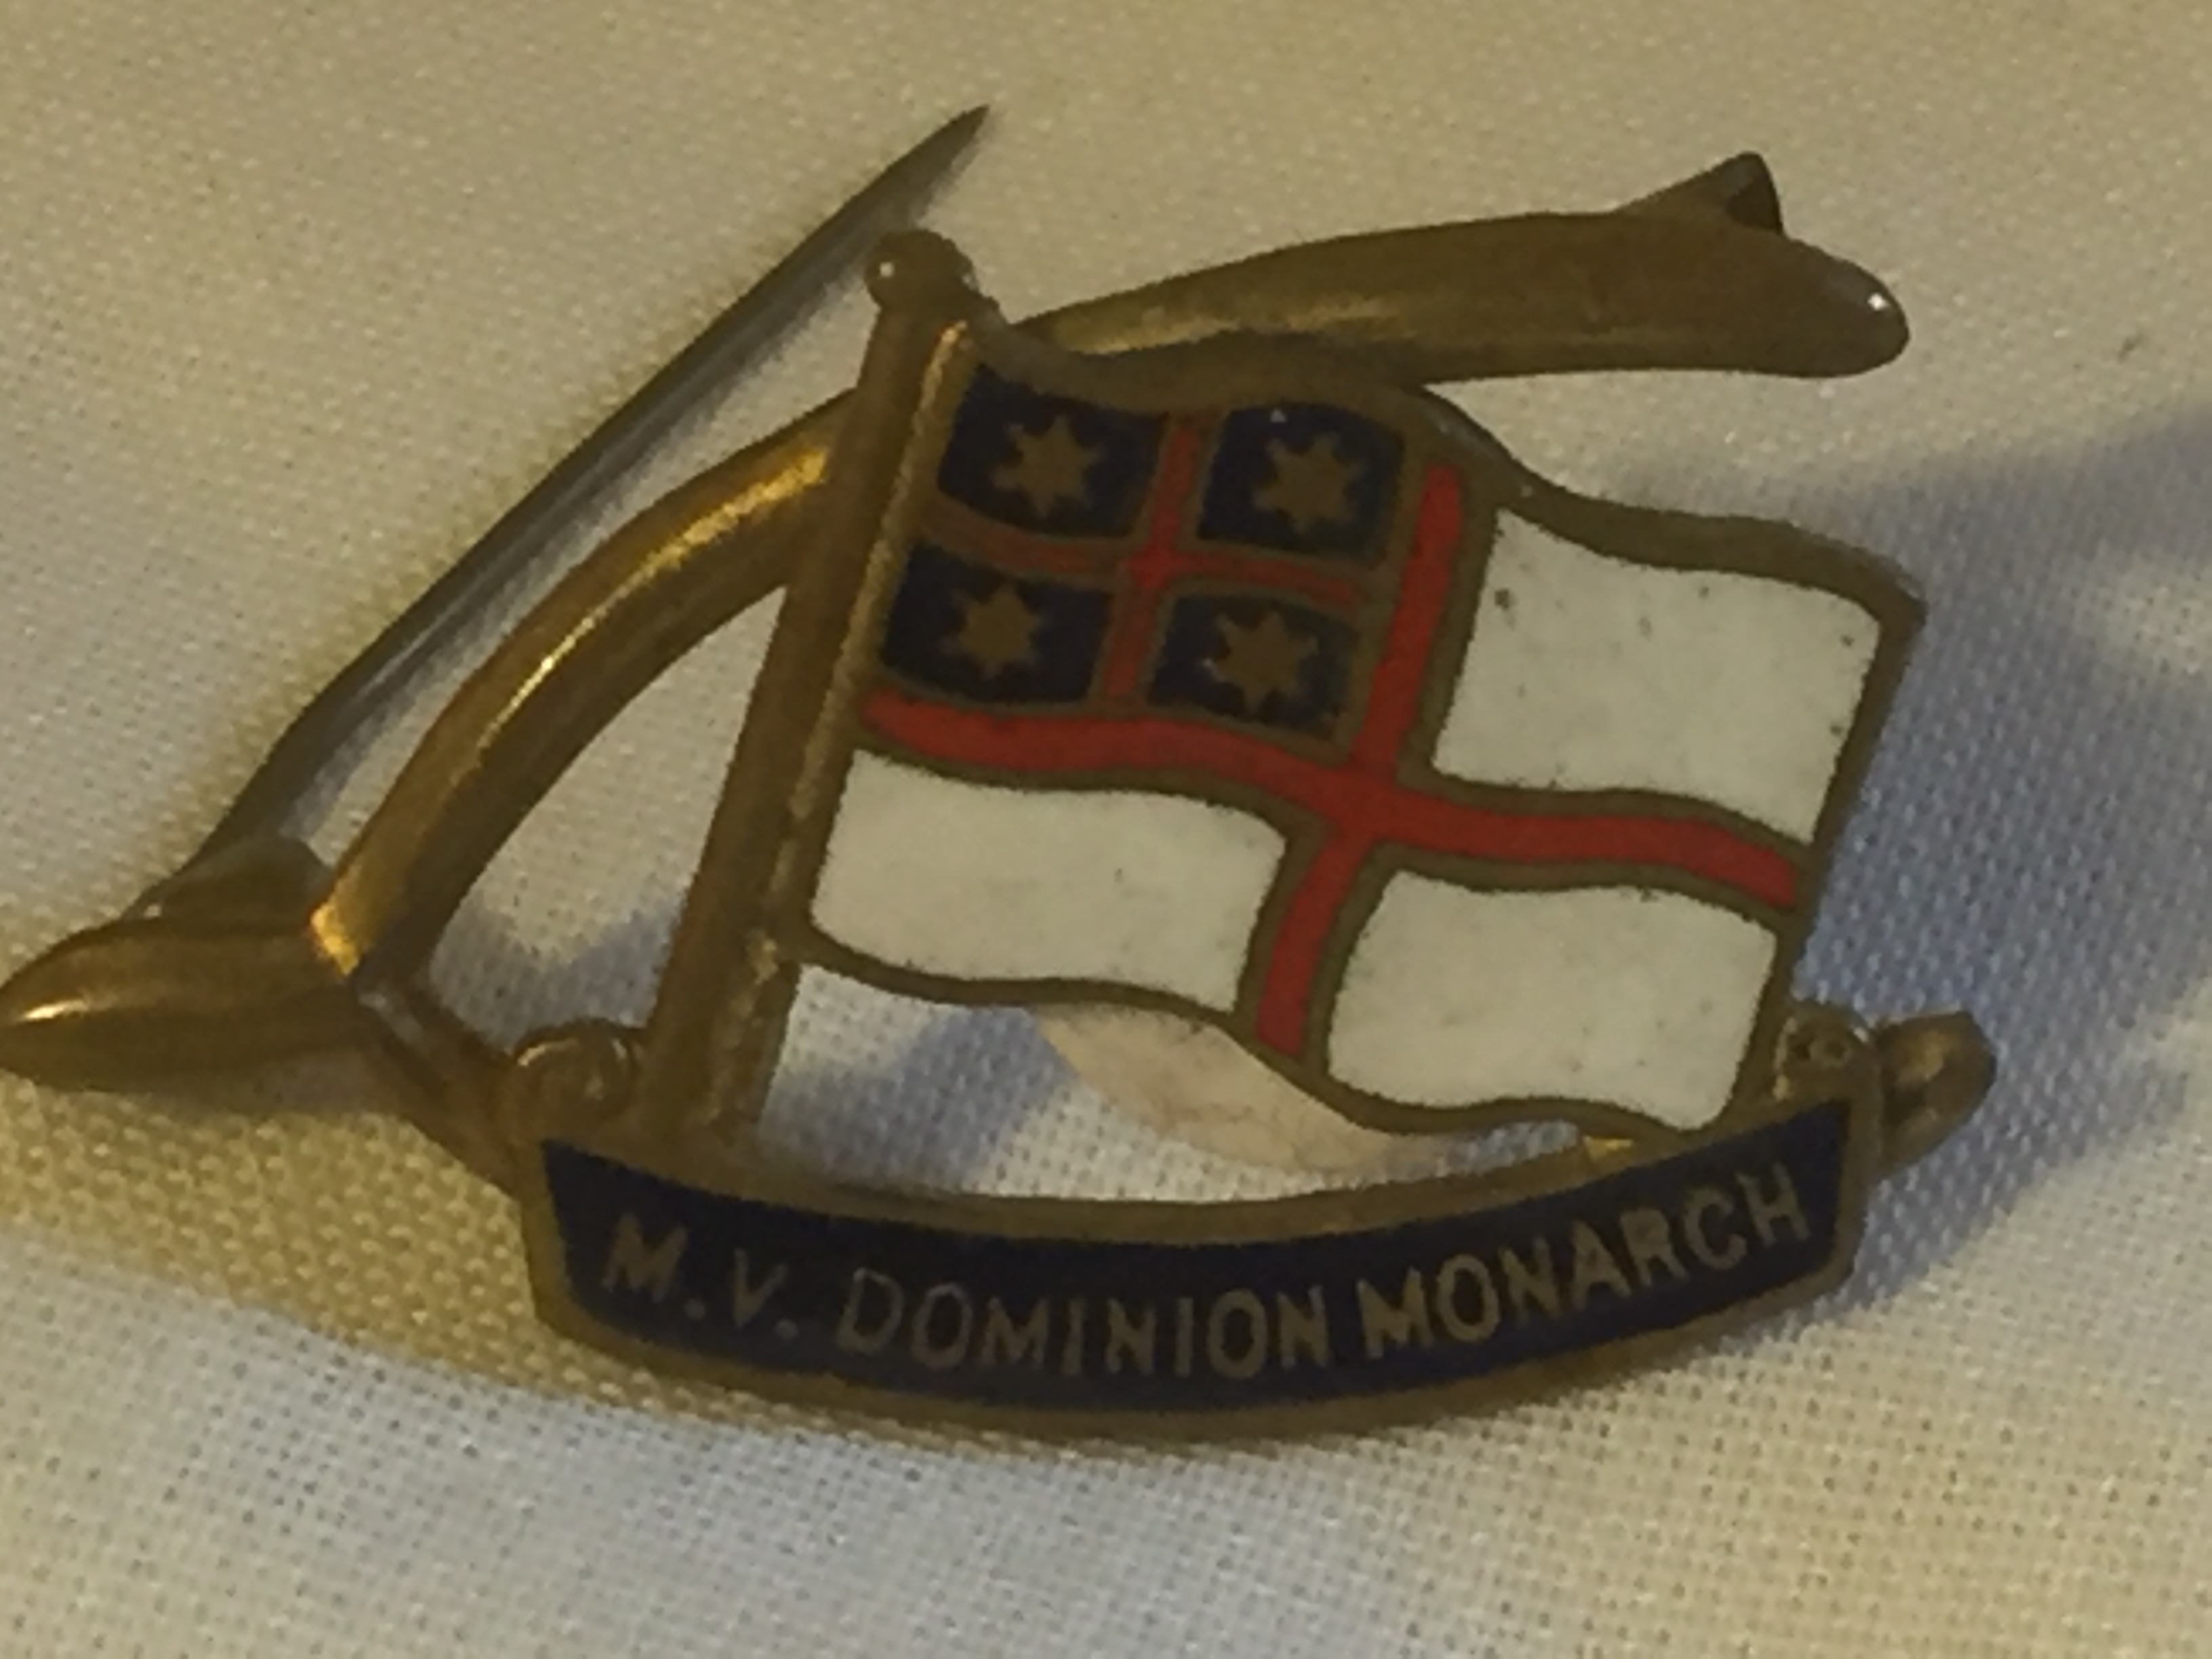 EARLY LAPEL PIN BADGE FROM THE DOMINION MONARCH A UK PASSENGER VESSEL